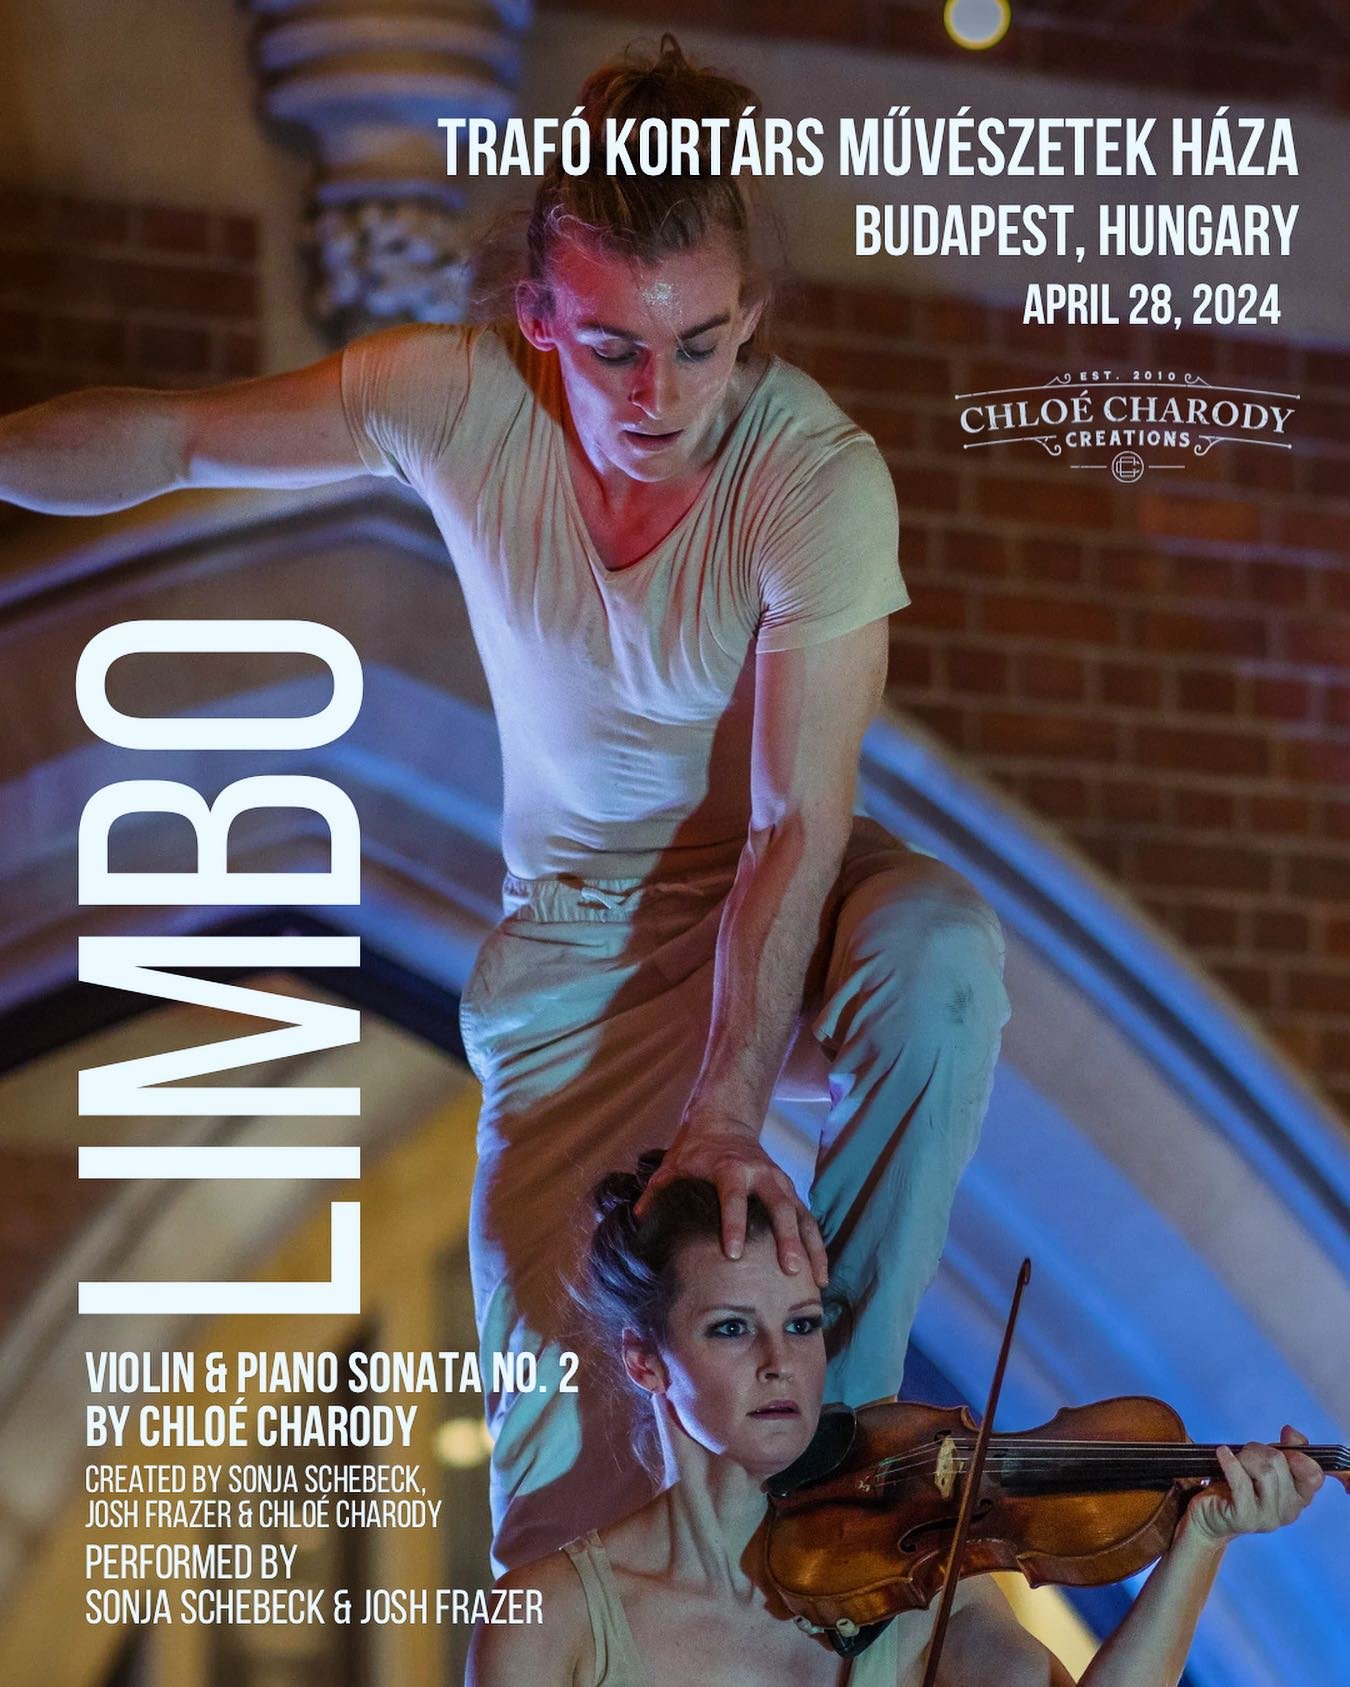 Looking forward to the #performance of #limbo today in #budapest #hungary - my ancestral hometown 🎶
&hellip;
Presented by @onetwomany_collective 
&hellip;
#hungary #chloecharodycreations #sonjaschebeck #joshfrazer #violin #sonata #classicalmusic #cl